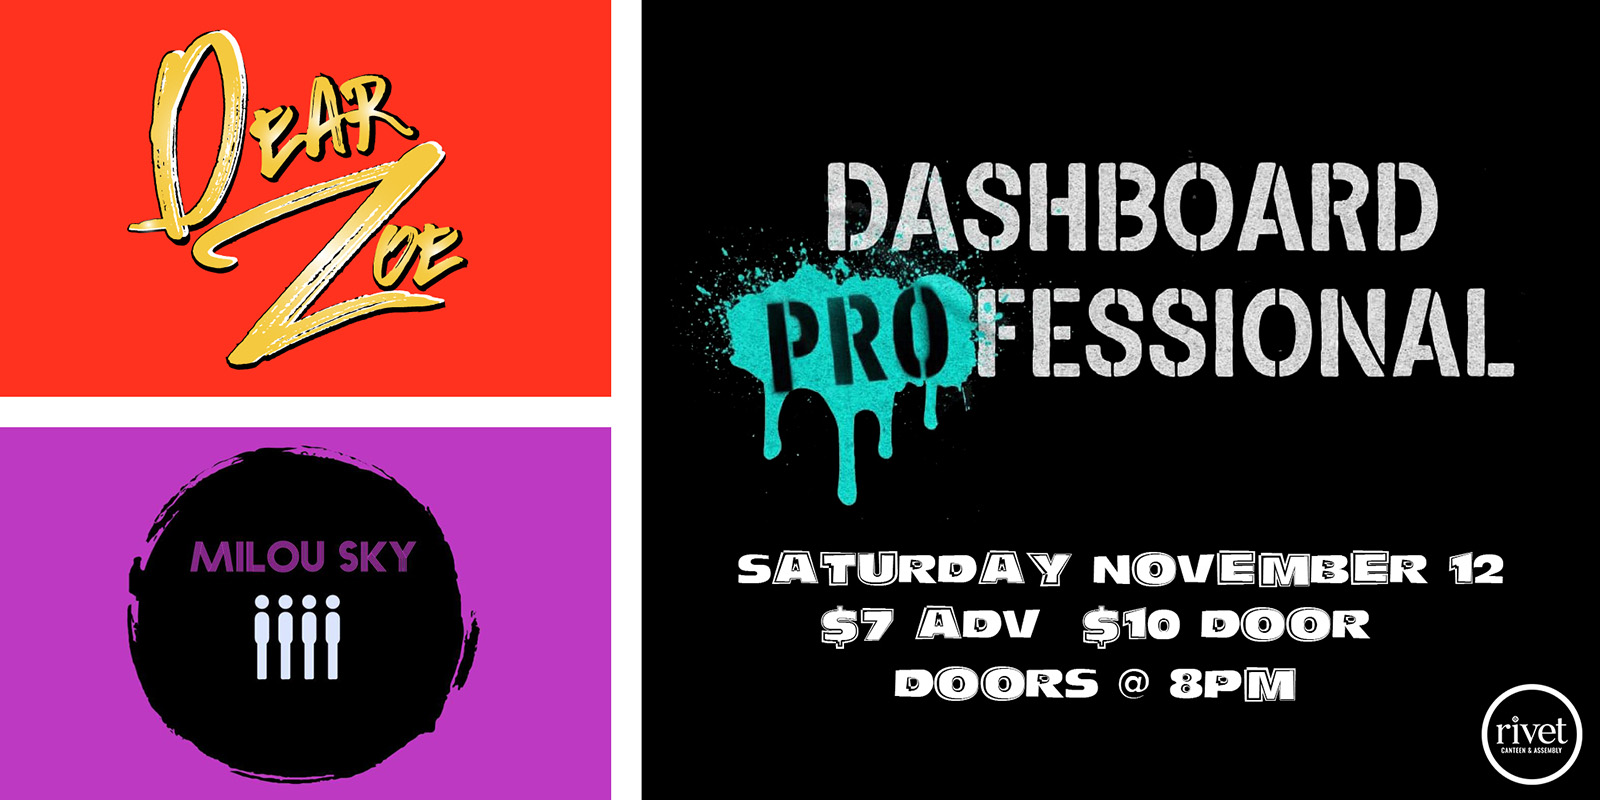 Dear Zoe, Milou Sky, and Dashboard PROfessional performing live at Rivet: Canteen & Assembly on Saturday, November 12th. 3 awesome singalong melodic acts on our stage in one night. Join us!